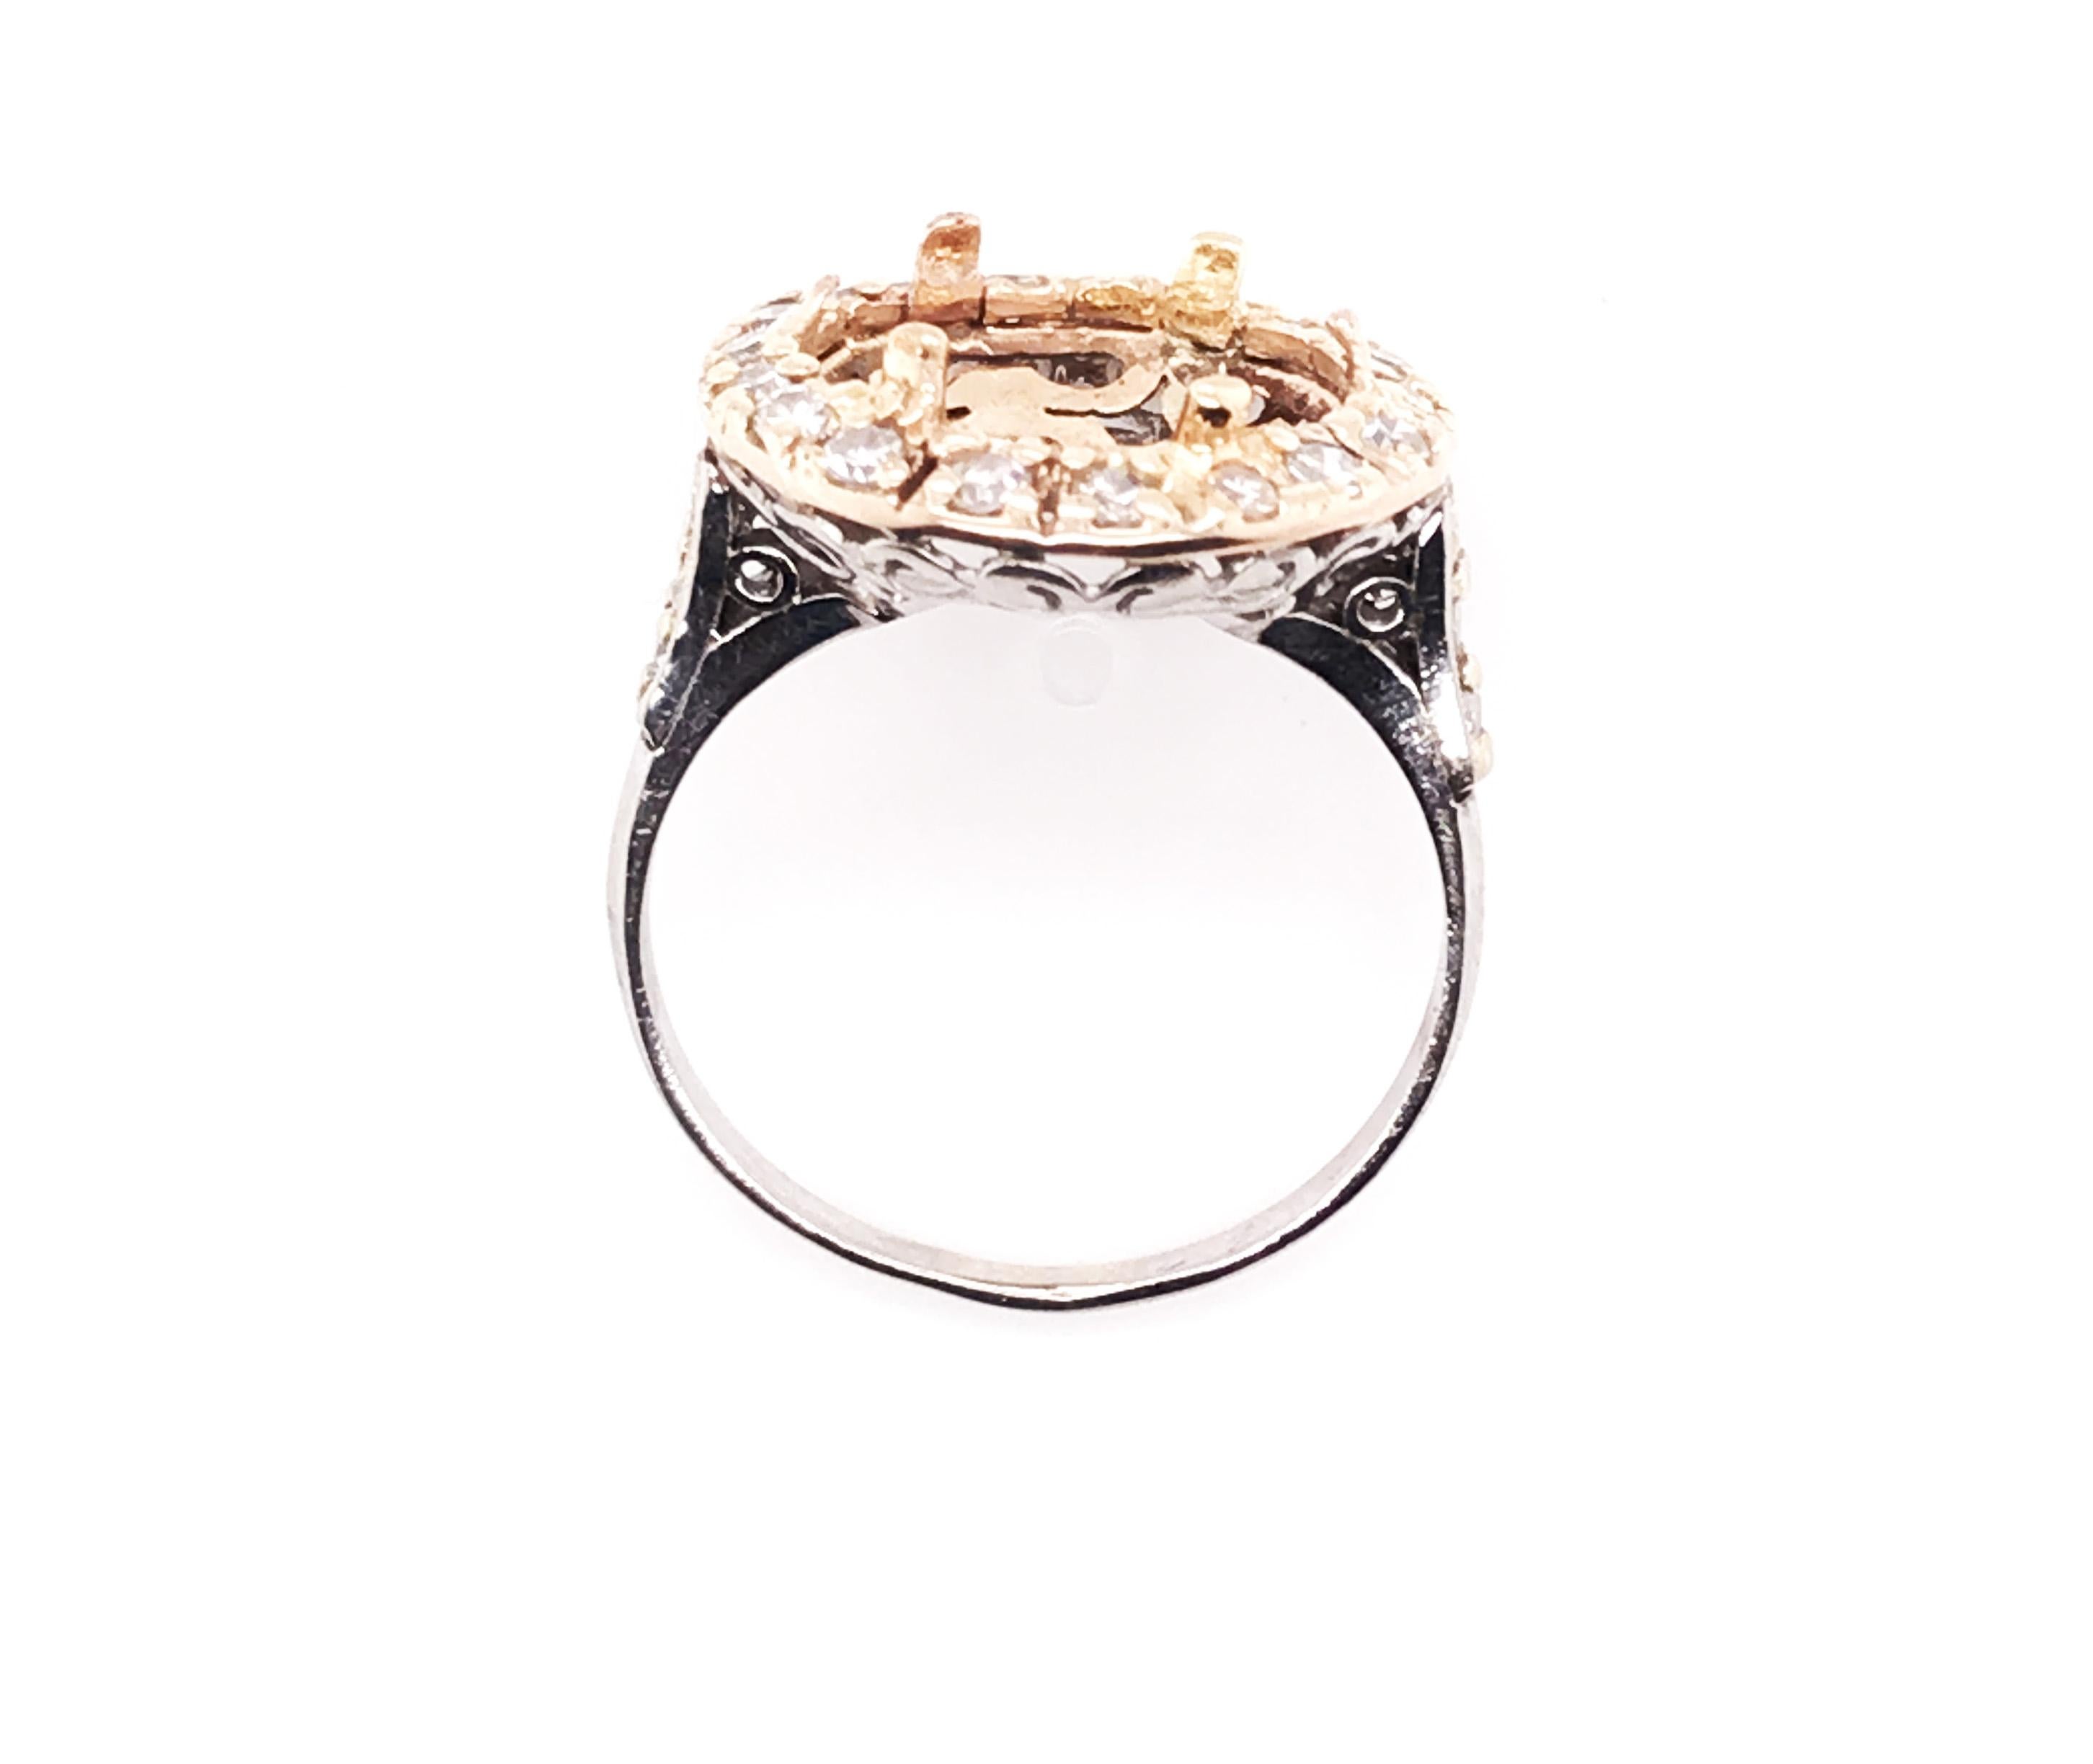 Genuine Original Art Deco Antique from 1910's Vintage Diamond .75ct 18K White Gold Semi Mount Engagement Ring



Opening is Approximately 11.5mm

Ring Will Hold a 7.00-8.00 Carat Round Center Stone

Antique Filigree Semi Mounts That Hold This Size